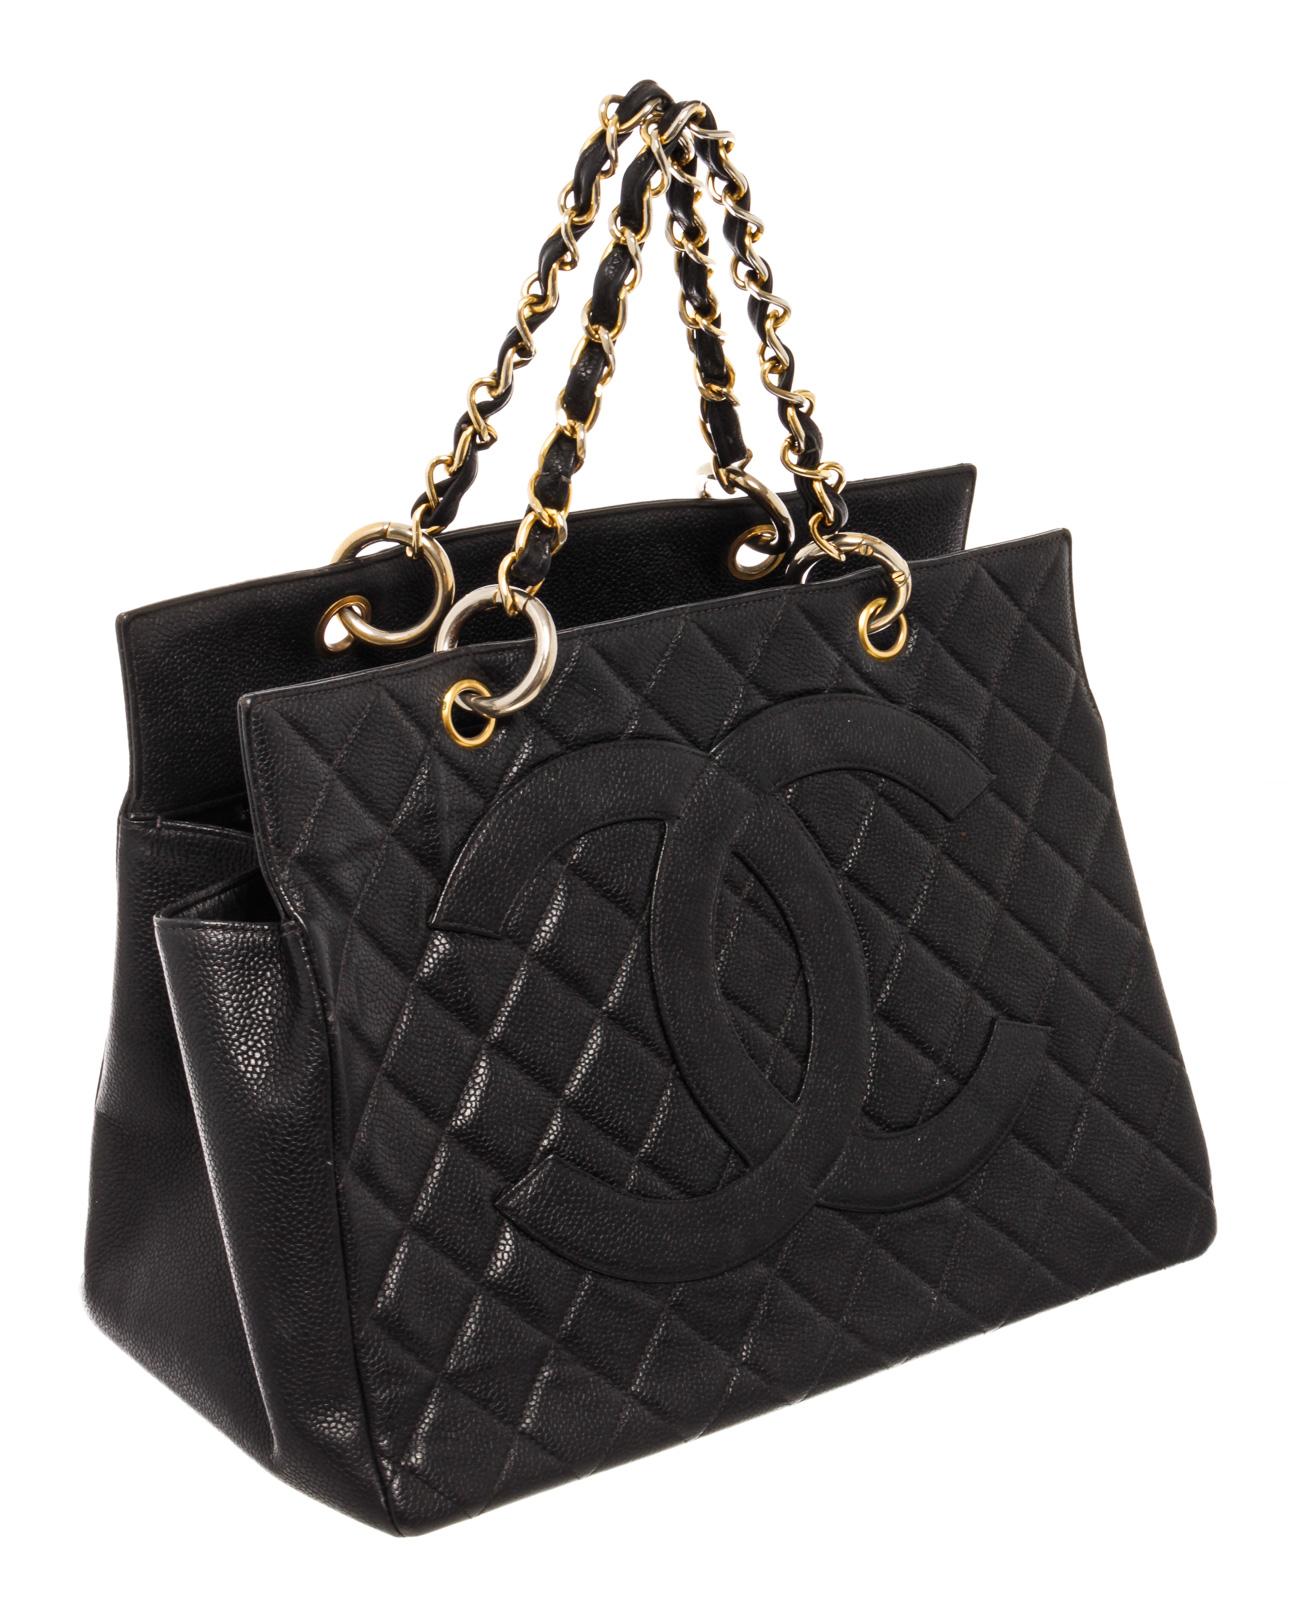 Black quilted Lambskin leather Chanel Grand Shopping Tote with gold-tone hardware, dual chain-link, single patch pocket at back, quilted CC logo at front, tonal grosgrain lining and multiple pockets inside; one with zip closure and open top.

